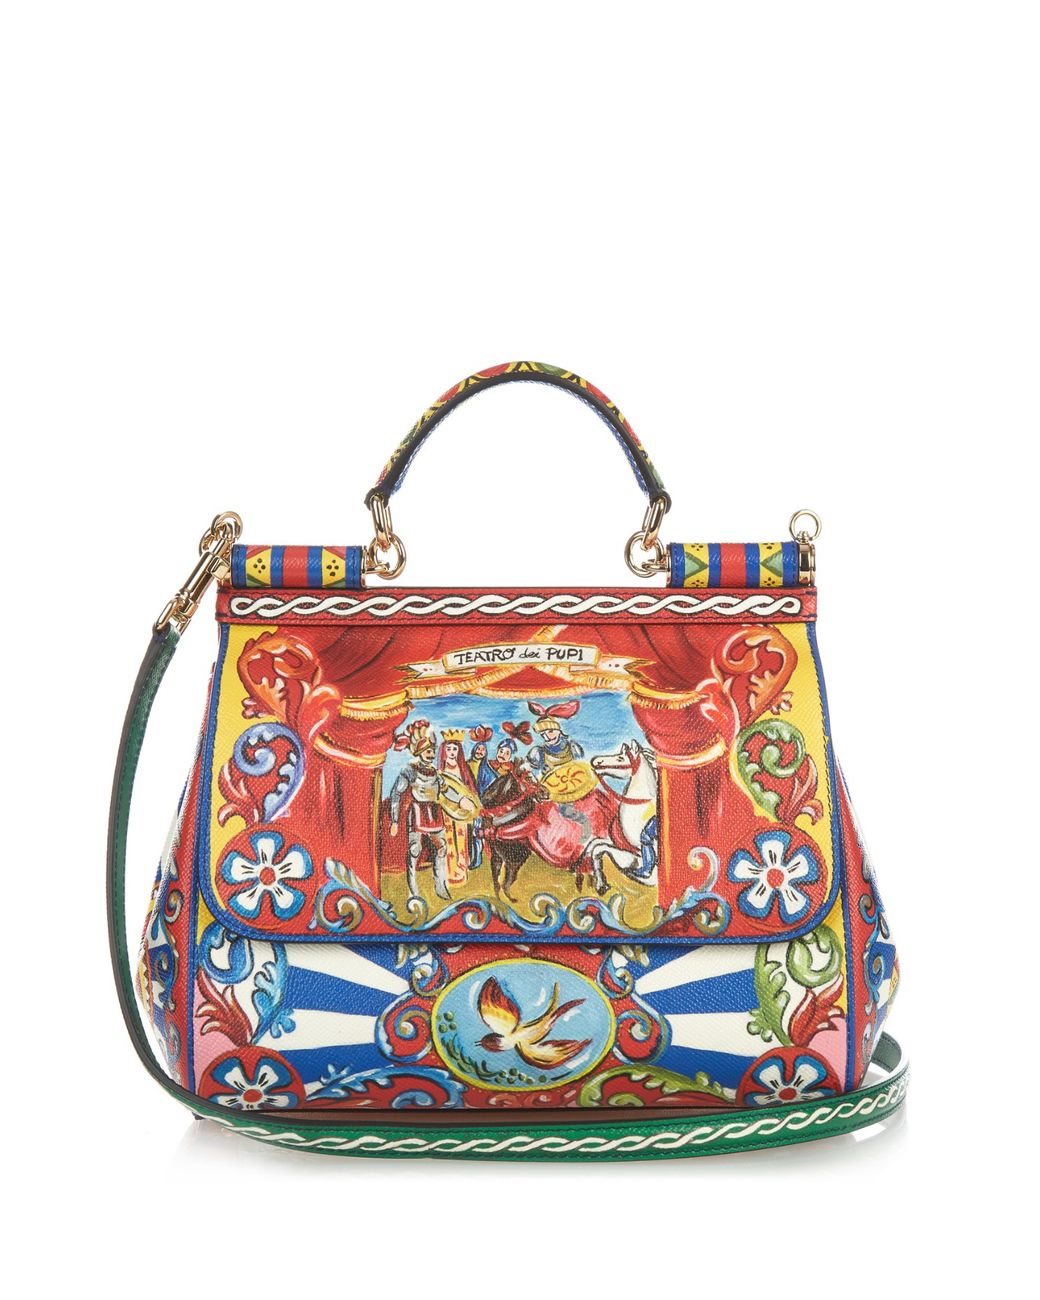 Dolce & Gabbana Sicily Medium Carretto-print Leather Bag in Red | Lyst